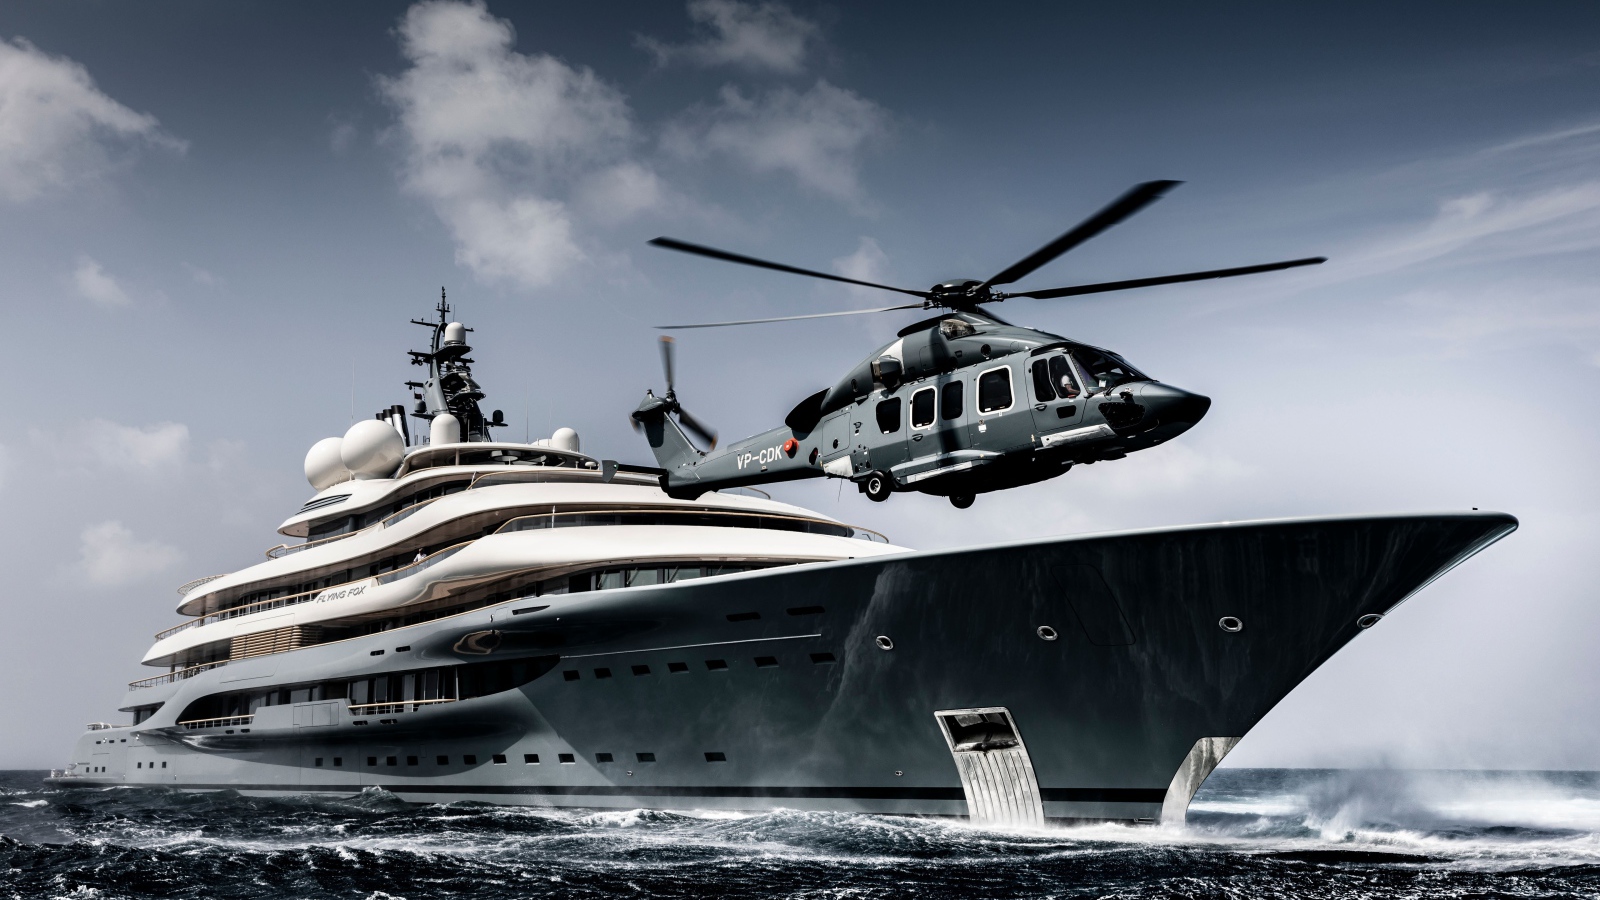 The helicopter lands on the yacht at sea